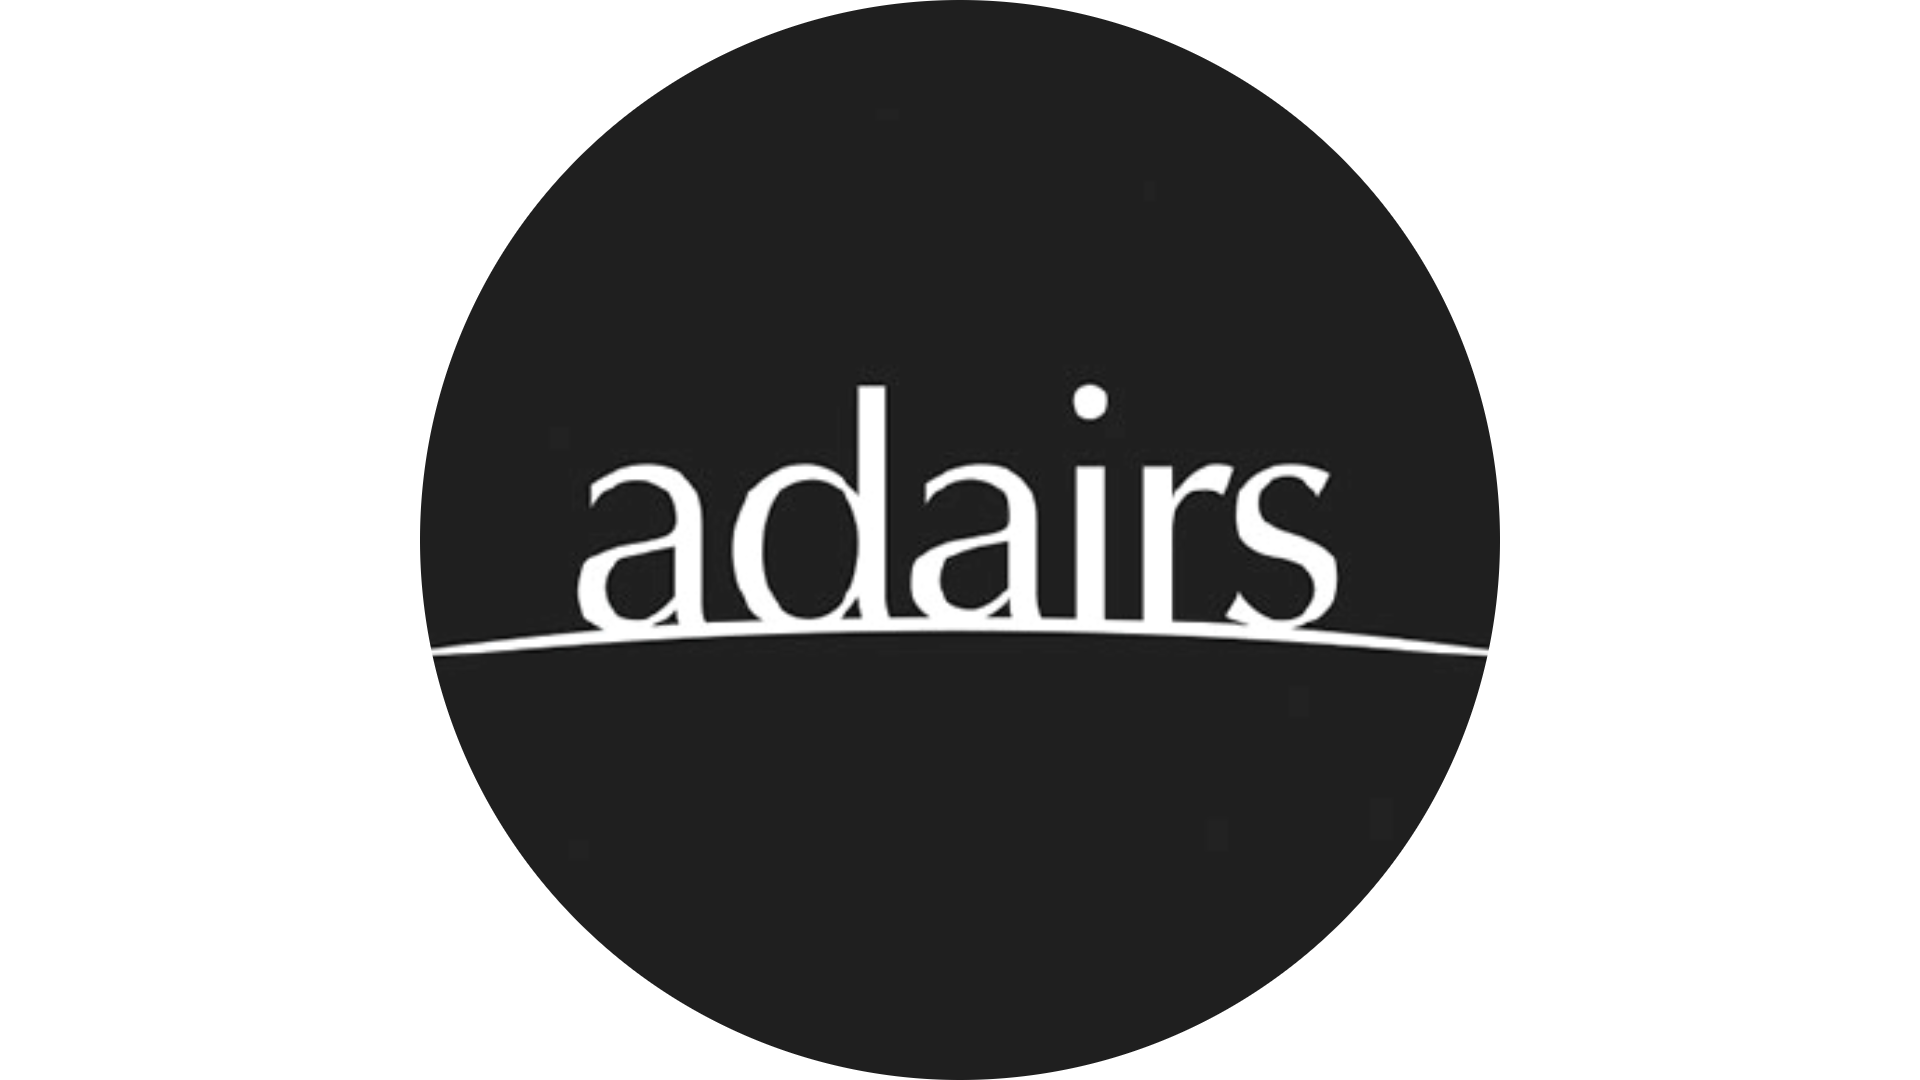 Get the Nordic style by shopping with Adairs